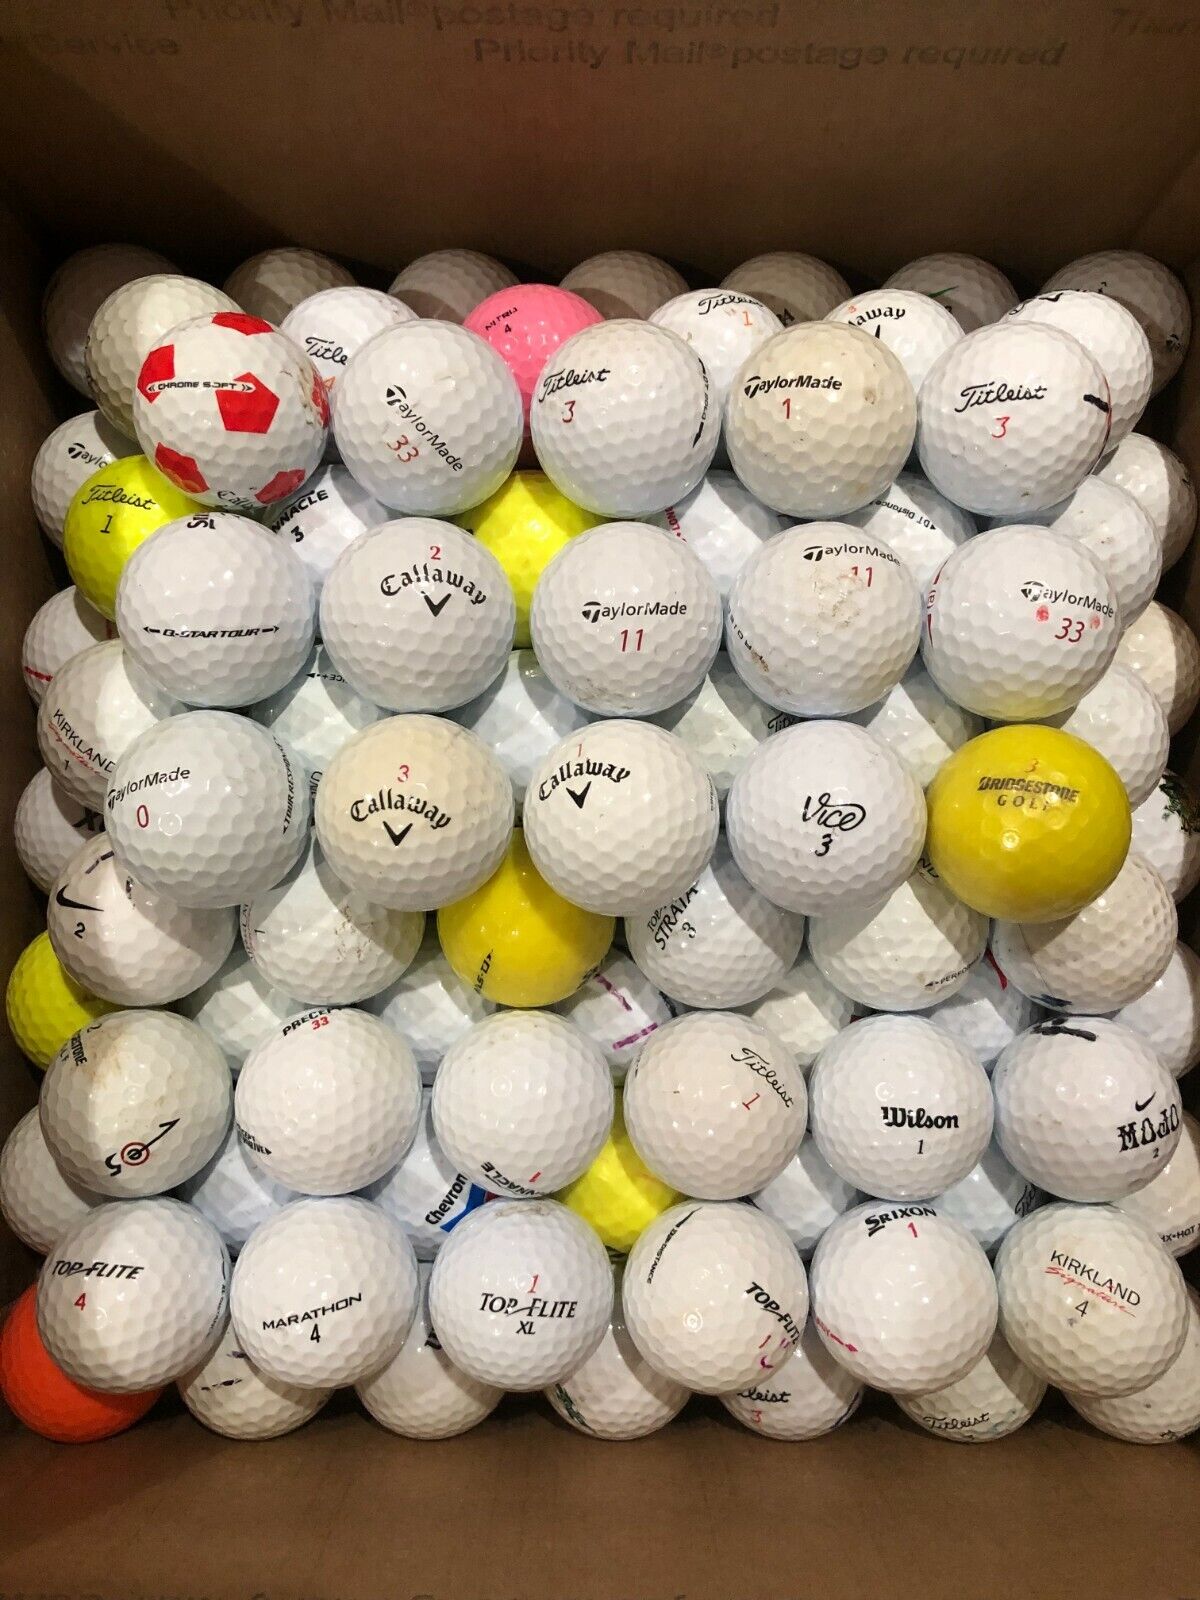 100 Used Golf Balls (Mixed brand)  AA/AAA grade.  Titleist, Callaway and others